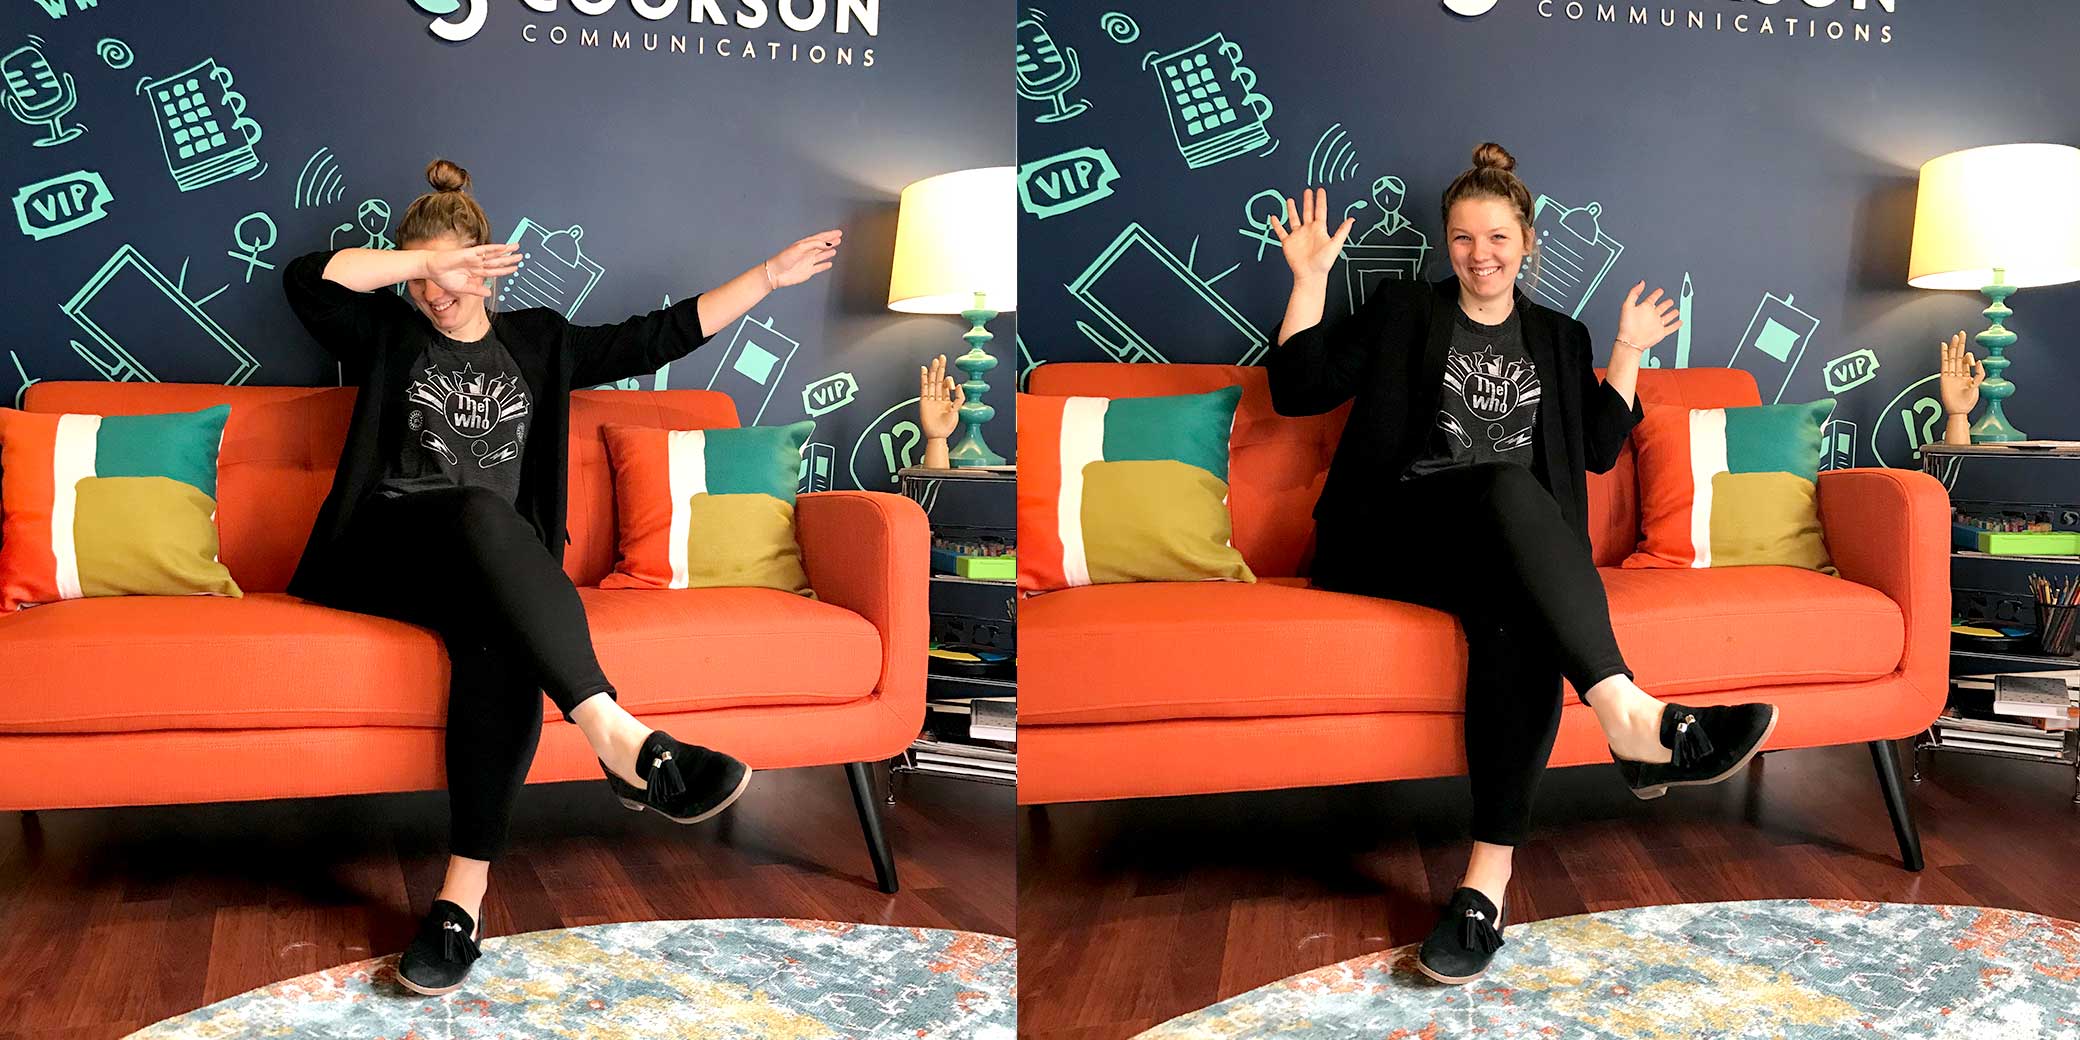 Intern Katharine Graham tells us thoughts on her Cookson Communications internship opportunity and explains her love of cubicles